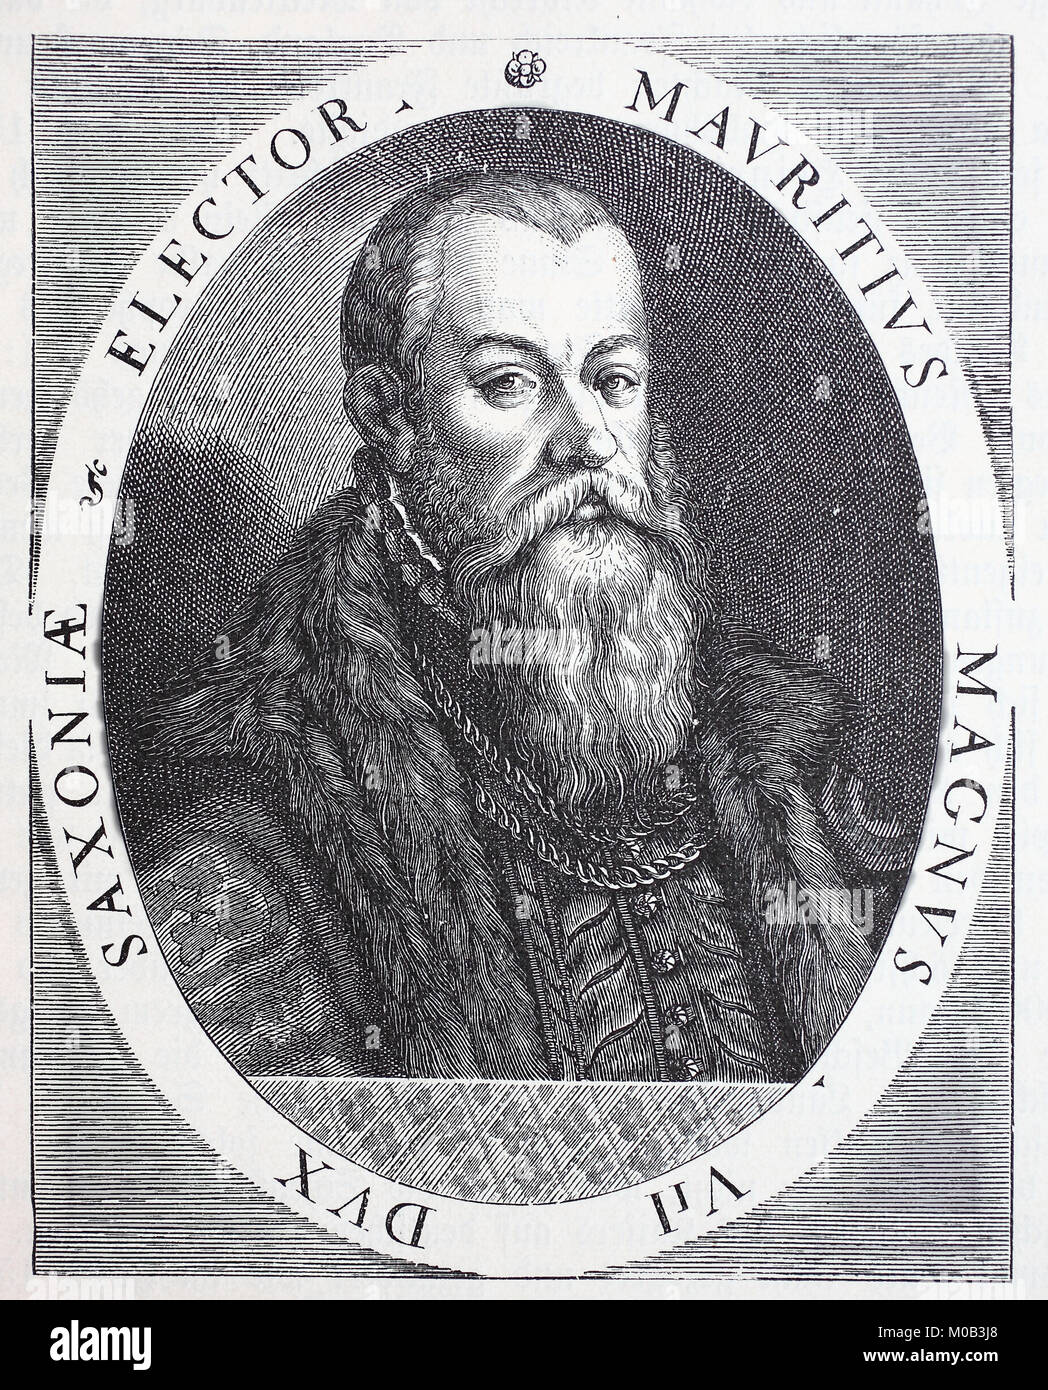 Moritz of Saxony, March 21, 1521 in Freiberg - July 11, 1553 at Sievershausen, was a native of the house of the Albertine Wettiner prince. He was from 1541 Duke of Albertine Saxony and from 1541 to 1549 Duke of Sagan and from 1547 also Elector of the Holy Roman Empire, Germany, digital improved reproduction of an original print from 1880 Stock Photo